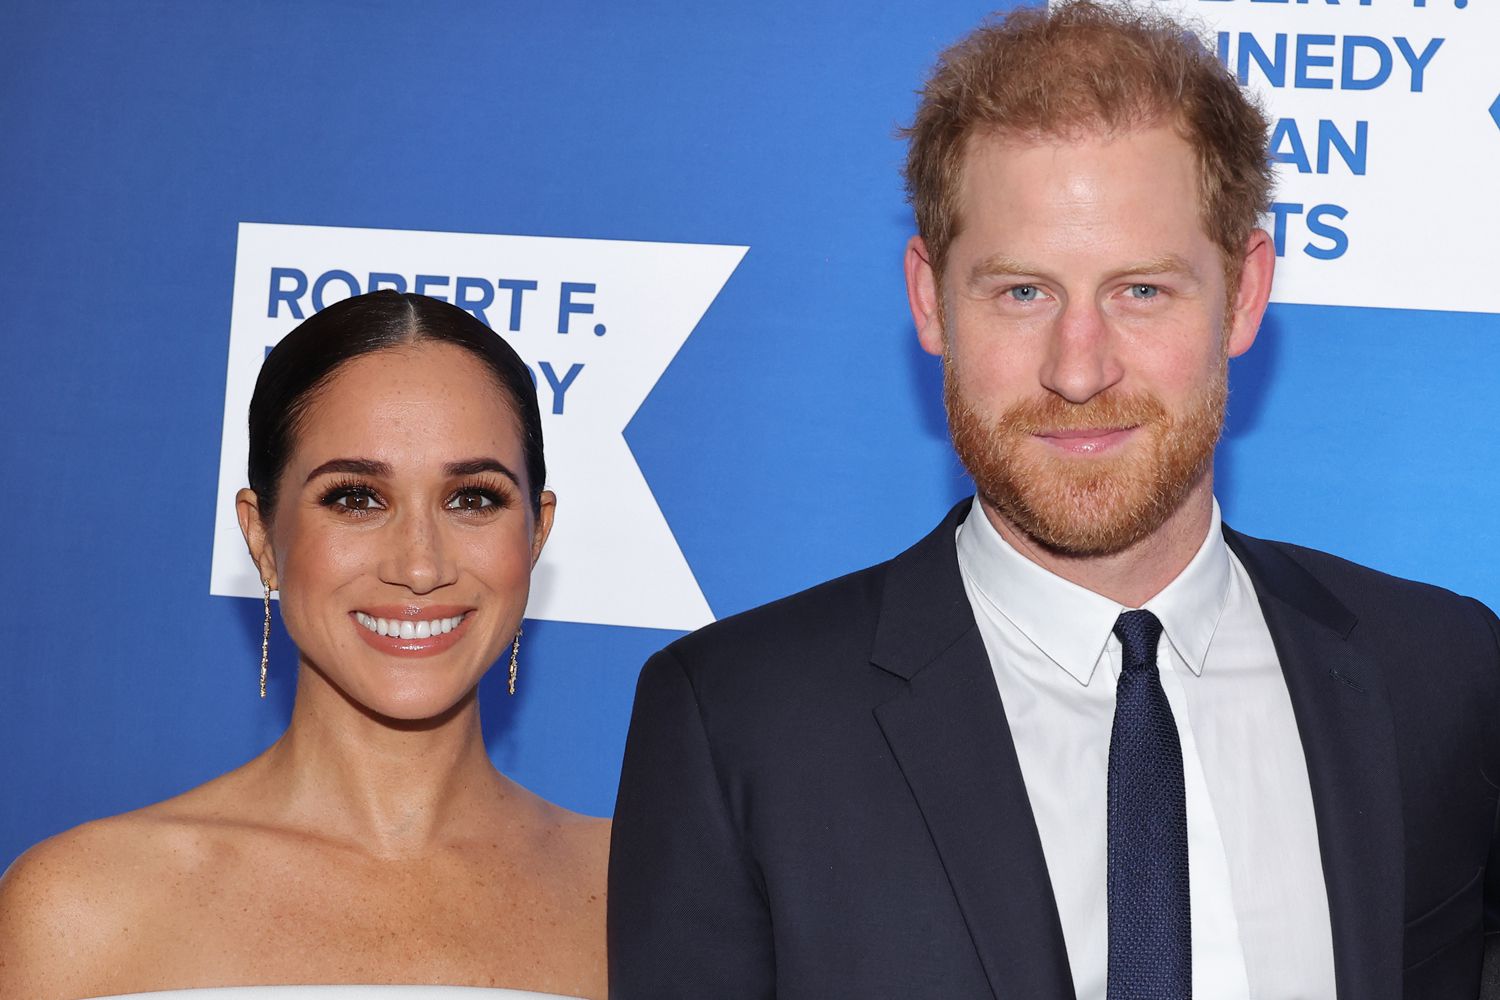 Meghan, Duchess of Sussex and Prince Harry, Duke of Sussex attend the 2022 Robert F. Kennedy Human Rights Ripple of Hope Gala